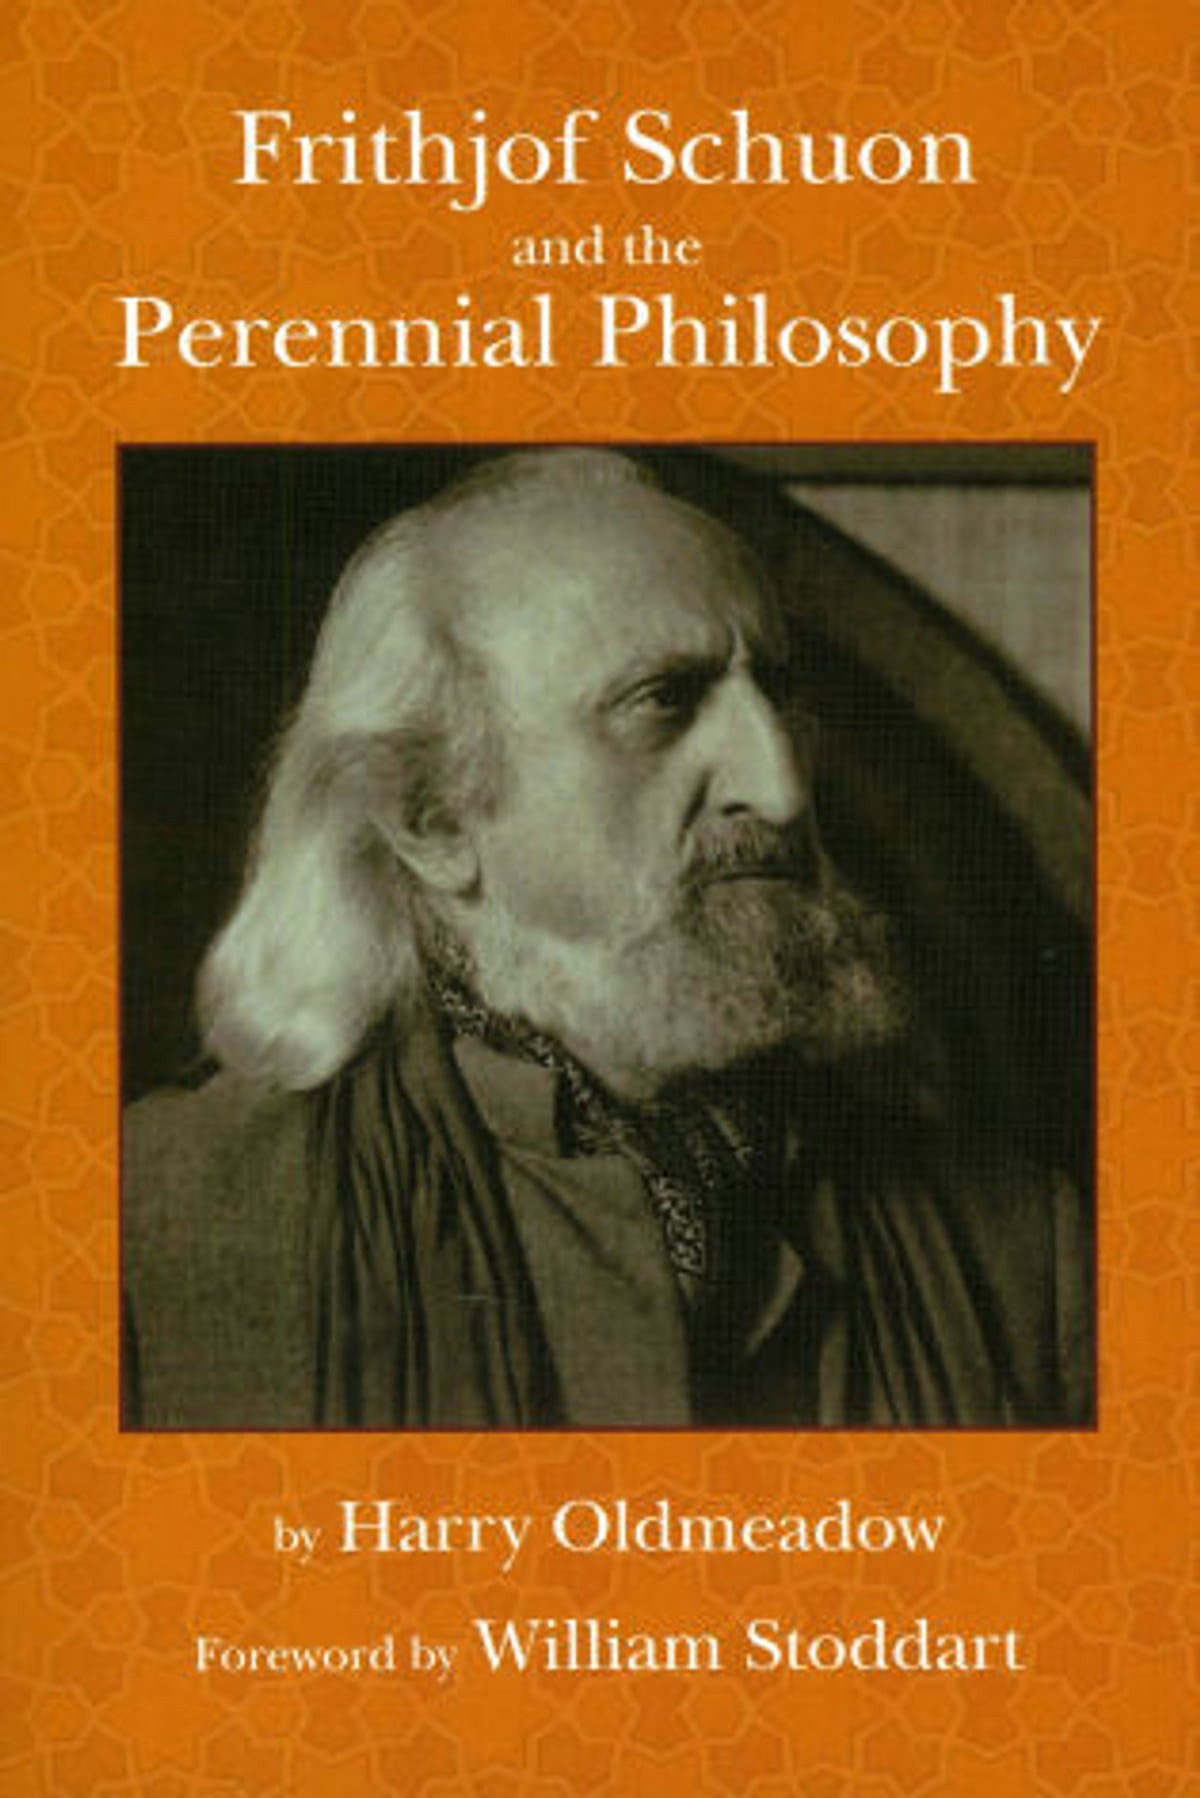 Frithjof Schuon and the Perennial Philosophy